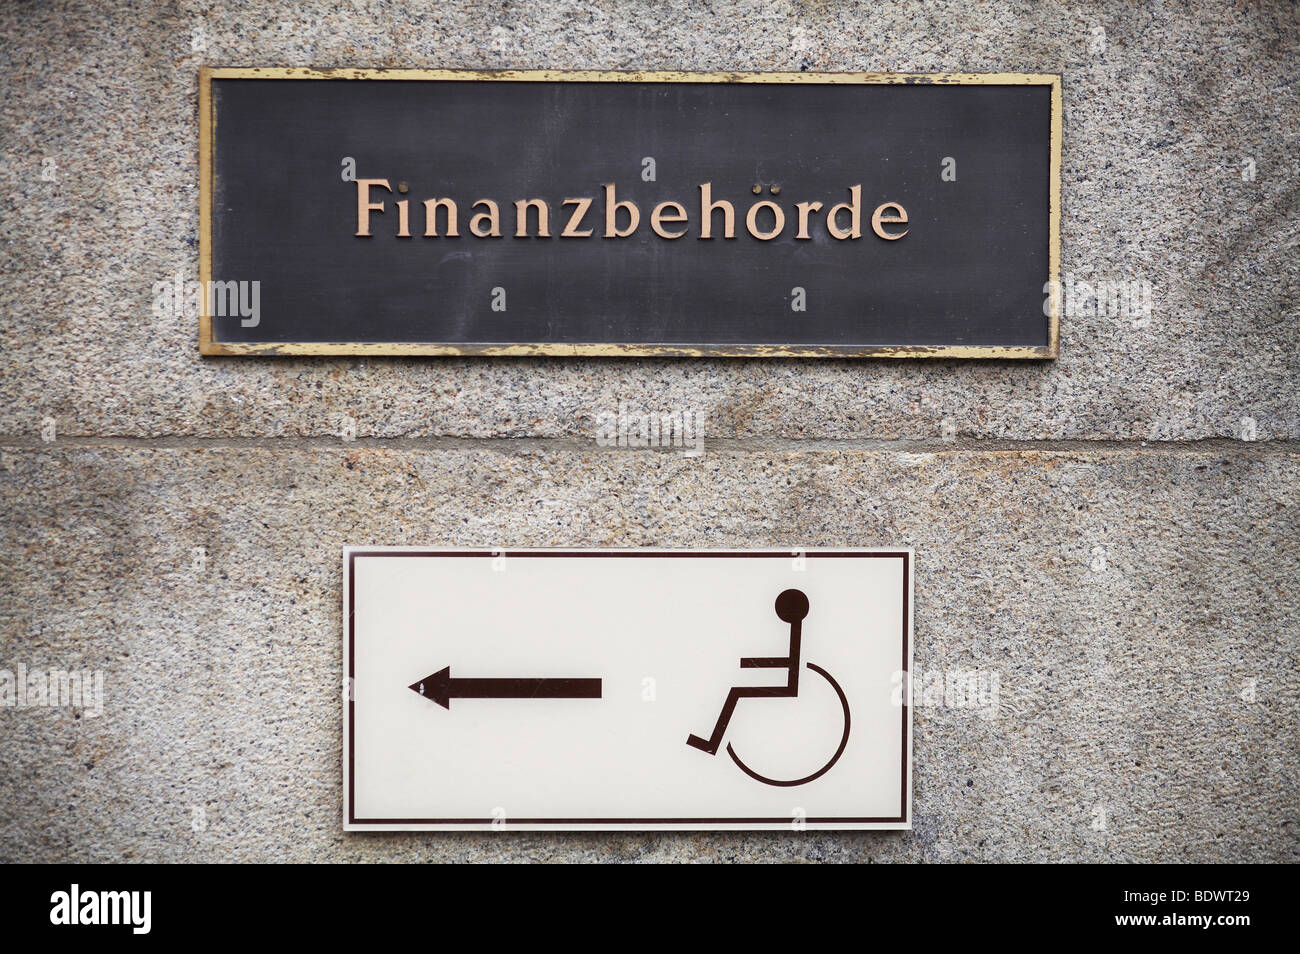 Sign, Finanzbehoerde, fiscal authority, below it sign for wheelchairs Stock Photo